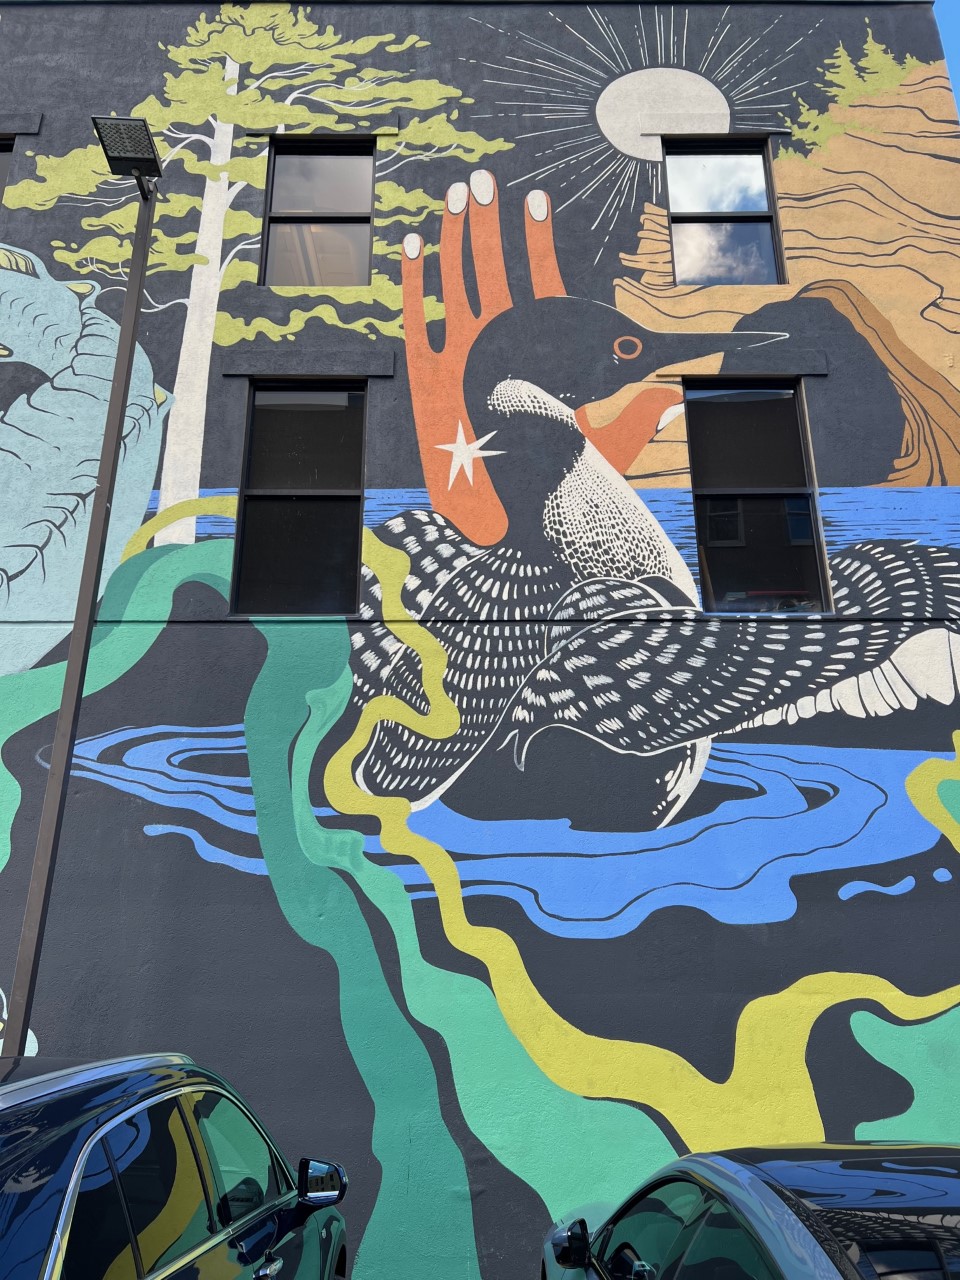 Image shows mural by artist Maddison Chaffer: colorful painting with bird